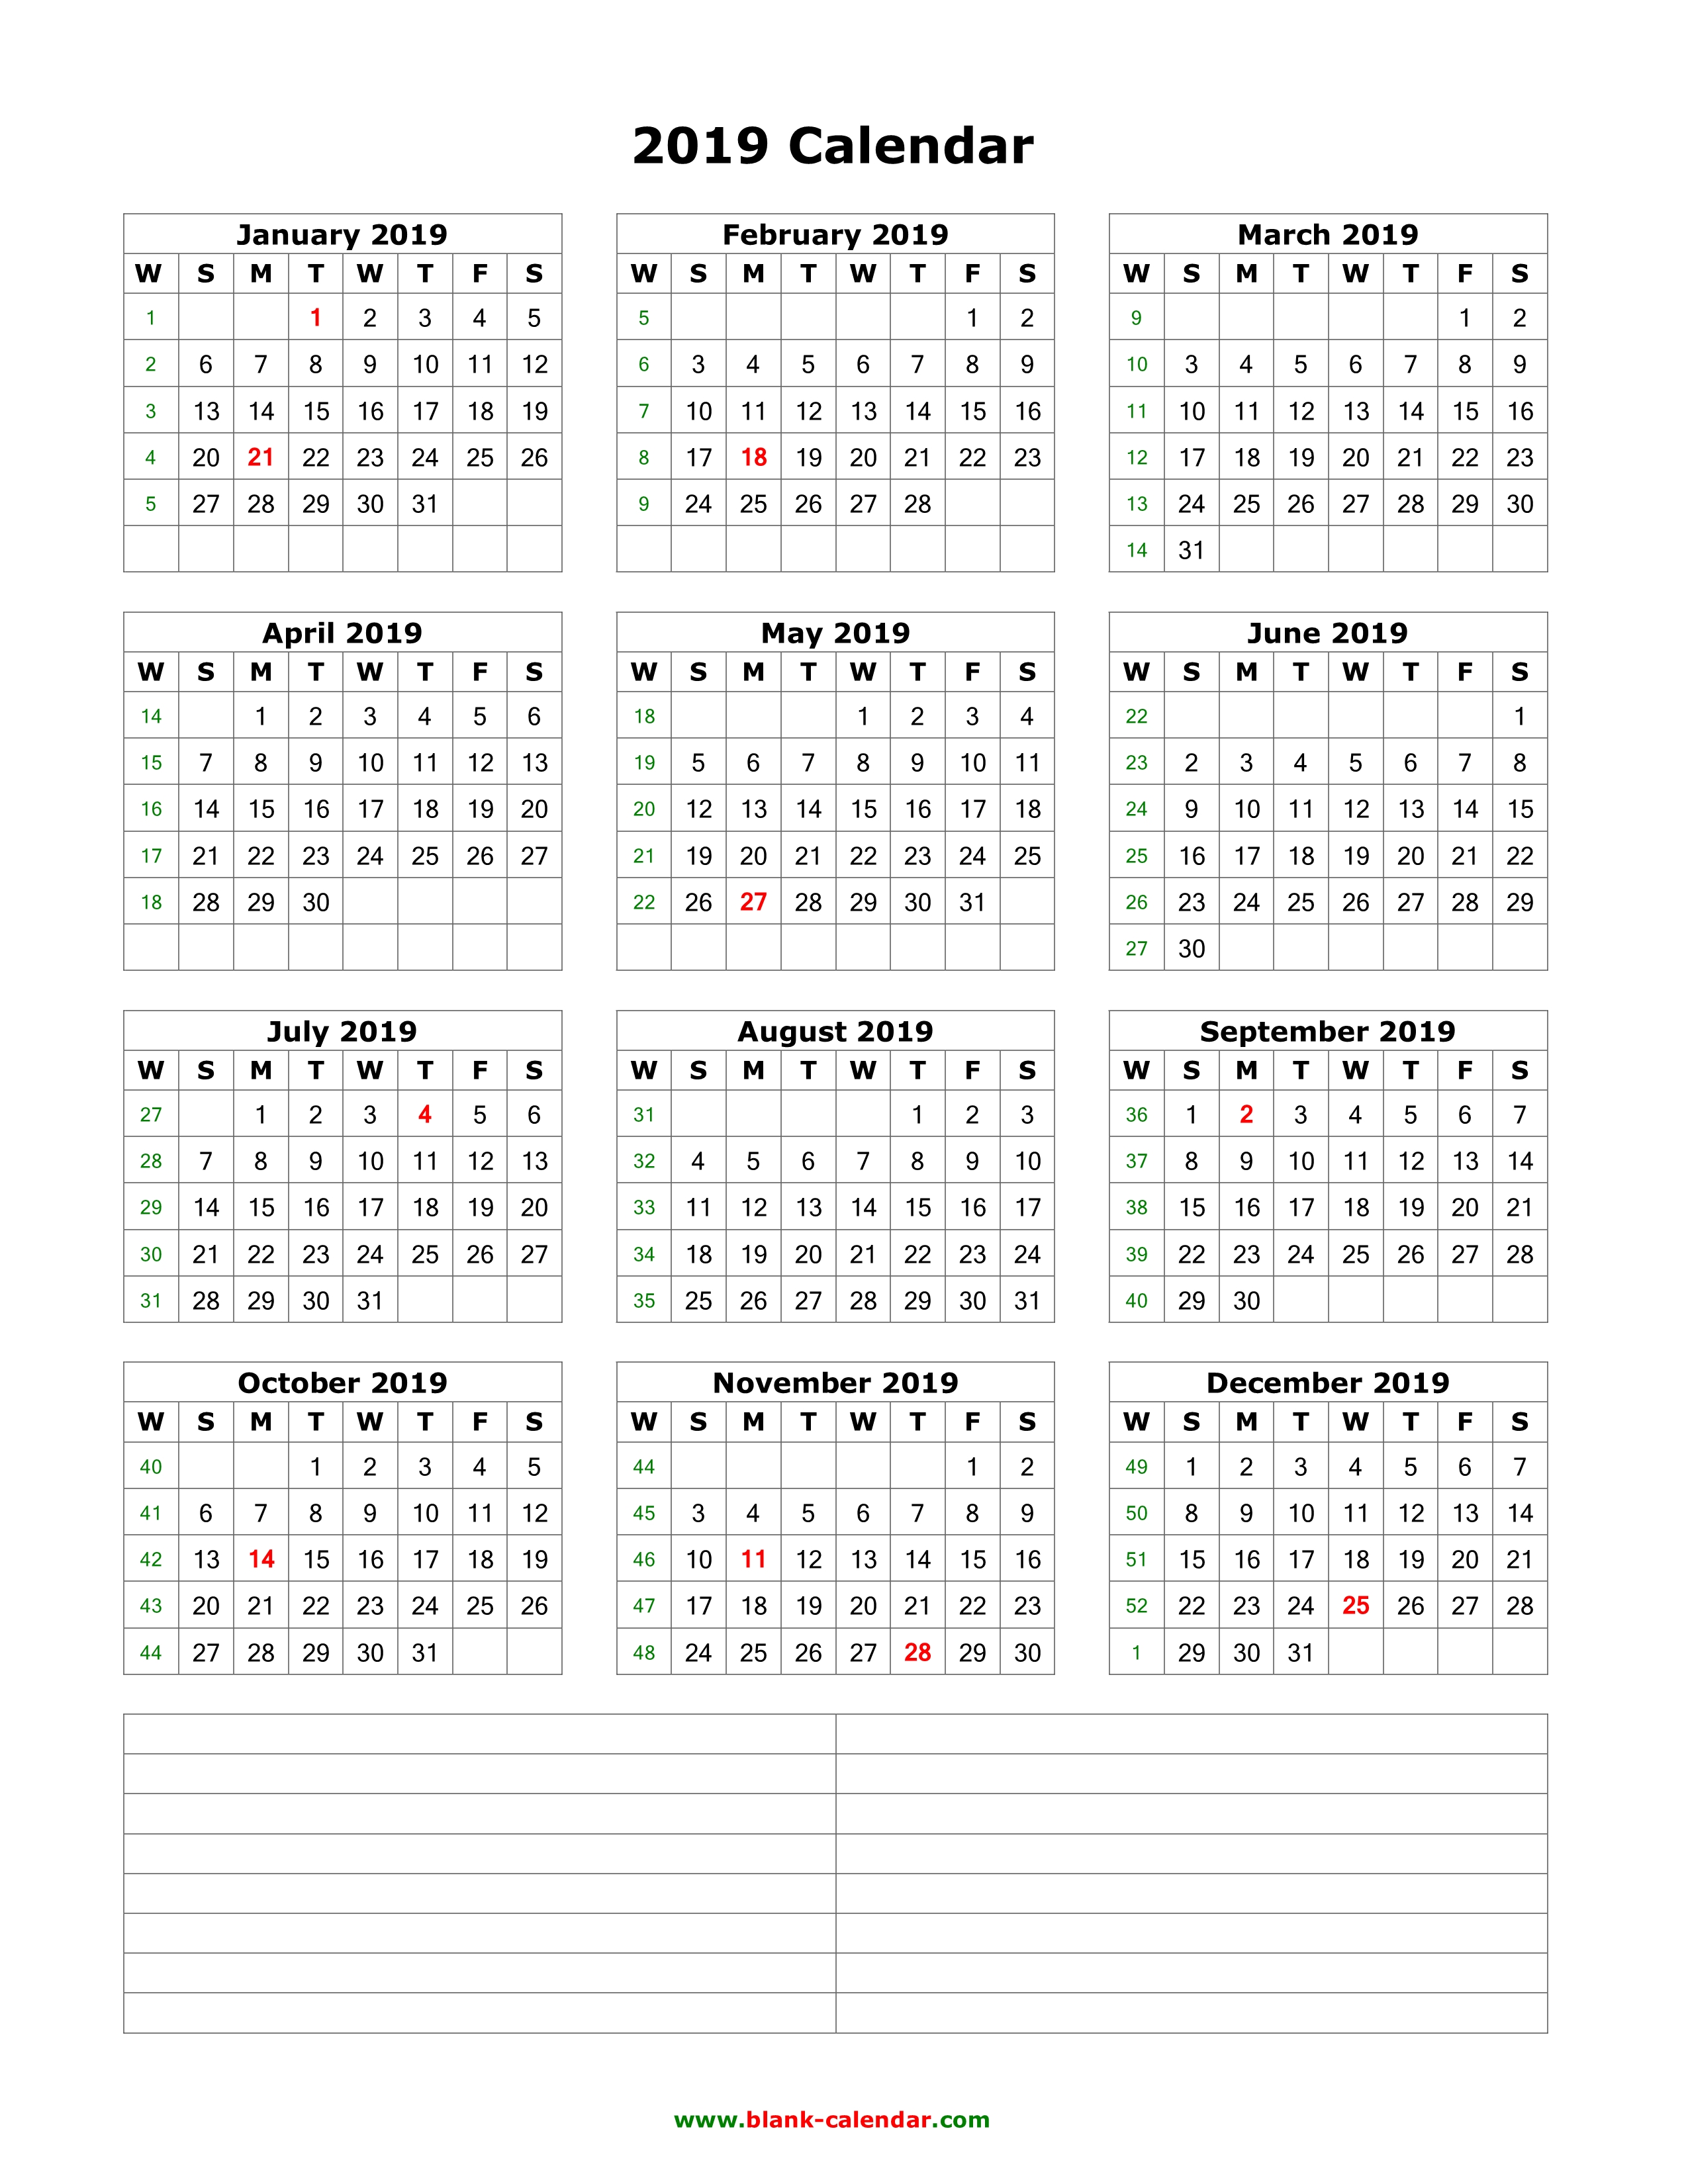 Download Blank Calendar 2019 with Space for Notes (12 months on one ...